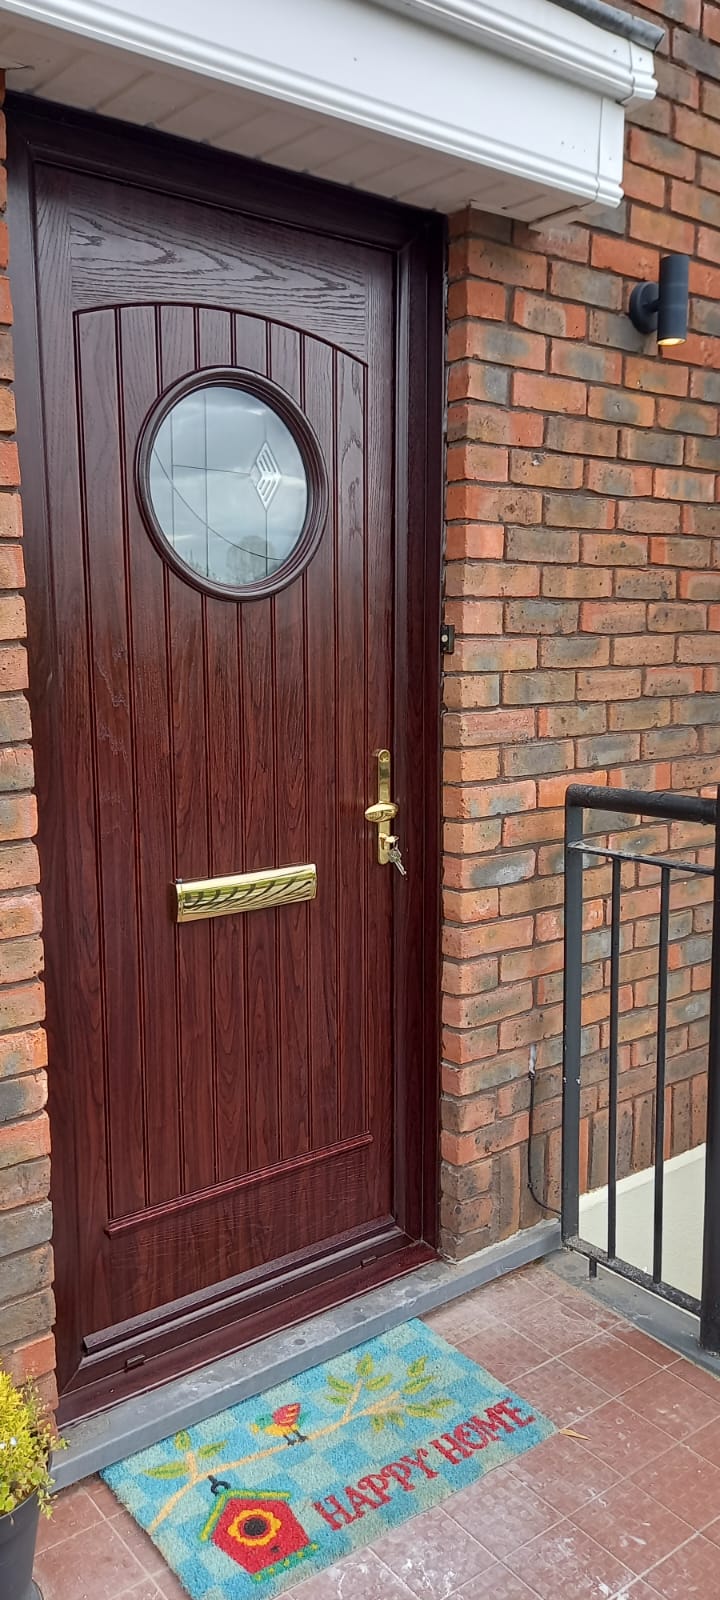 Read more about the article Priory Hall, Crumlin, Dublin – Palladio Single Door